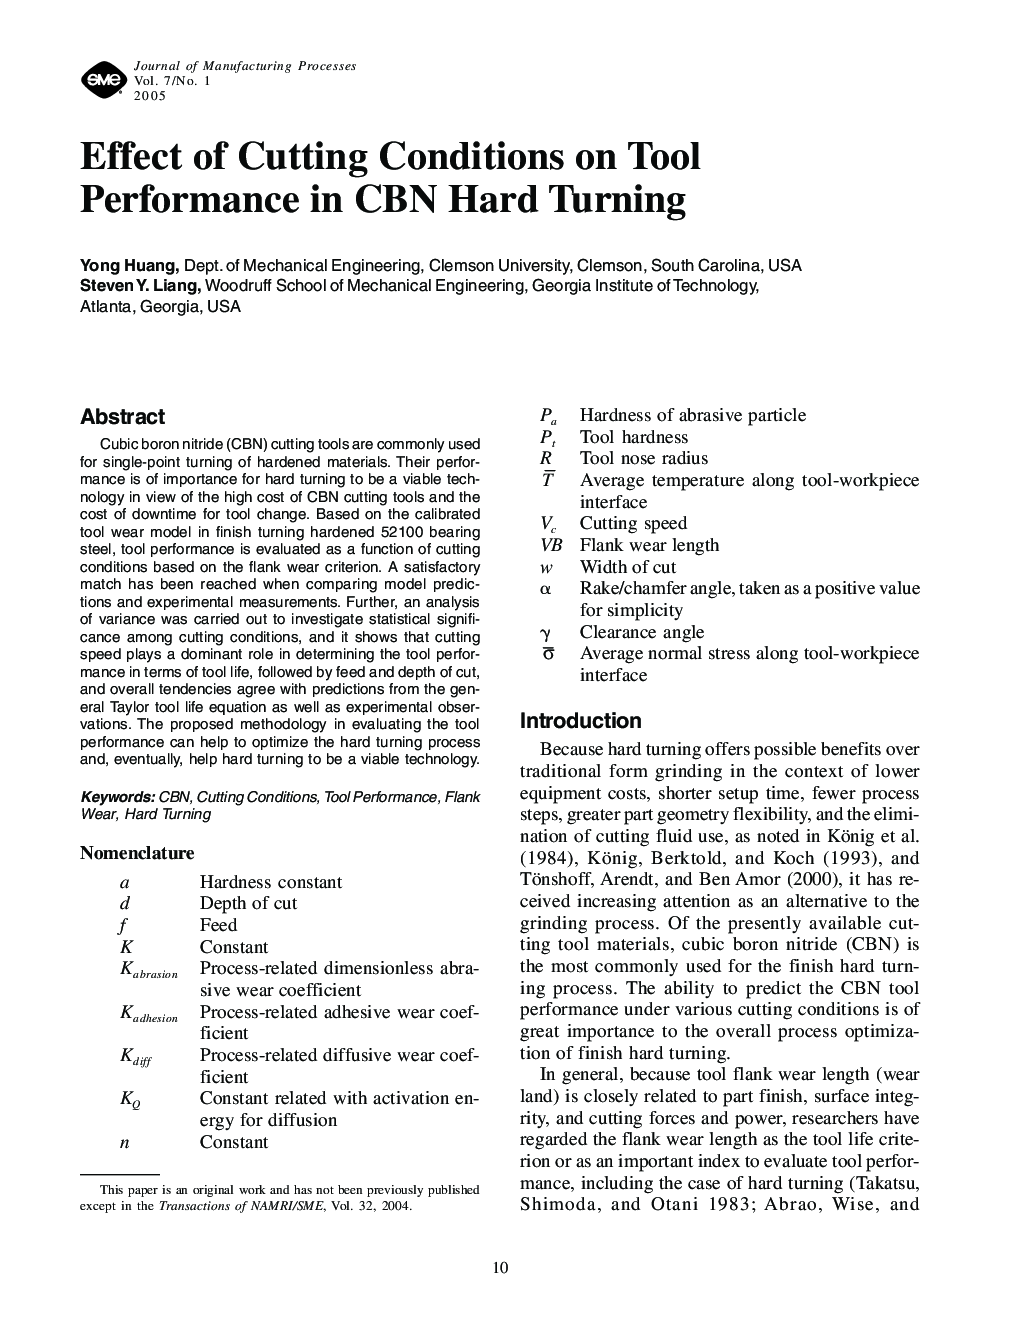 Effect of Cutting Conditions on Tool Performance in CBN Hard Turning